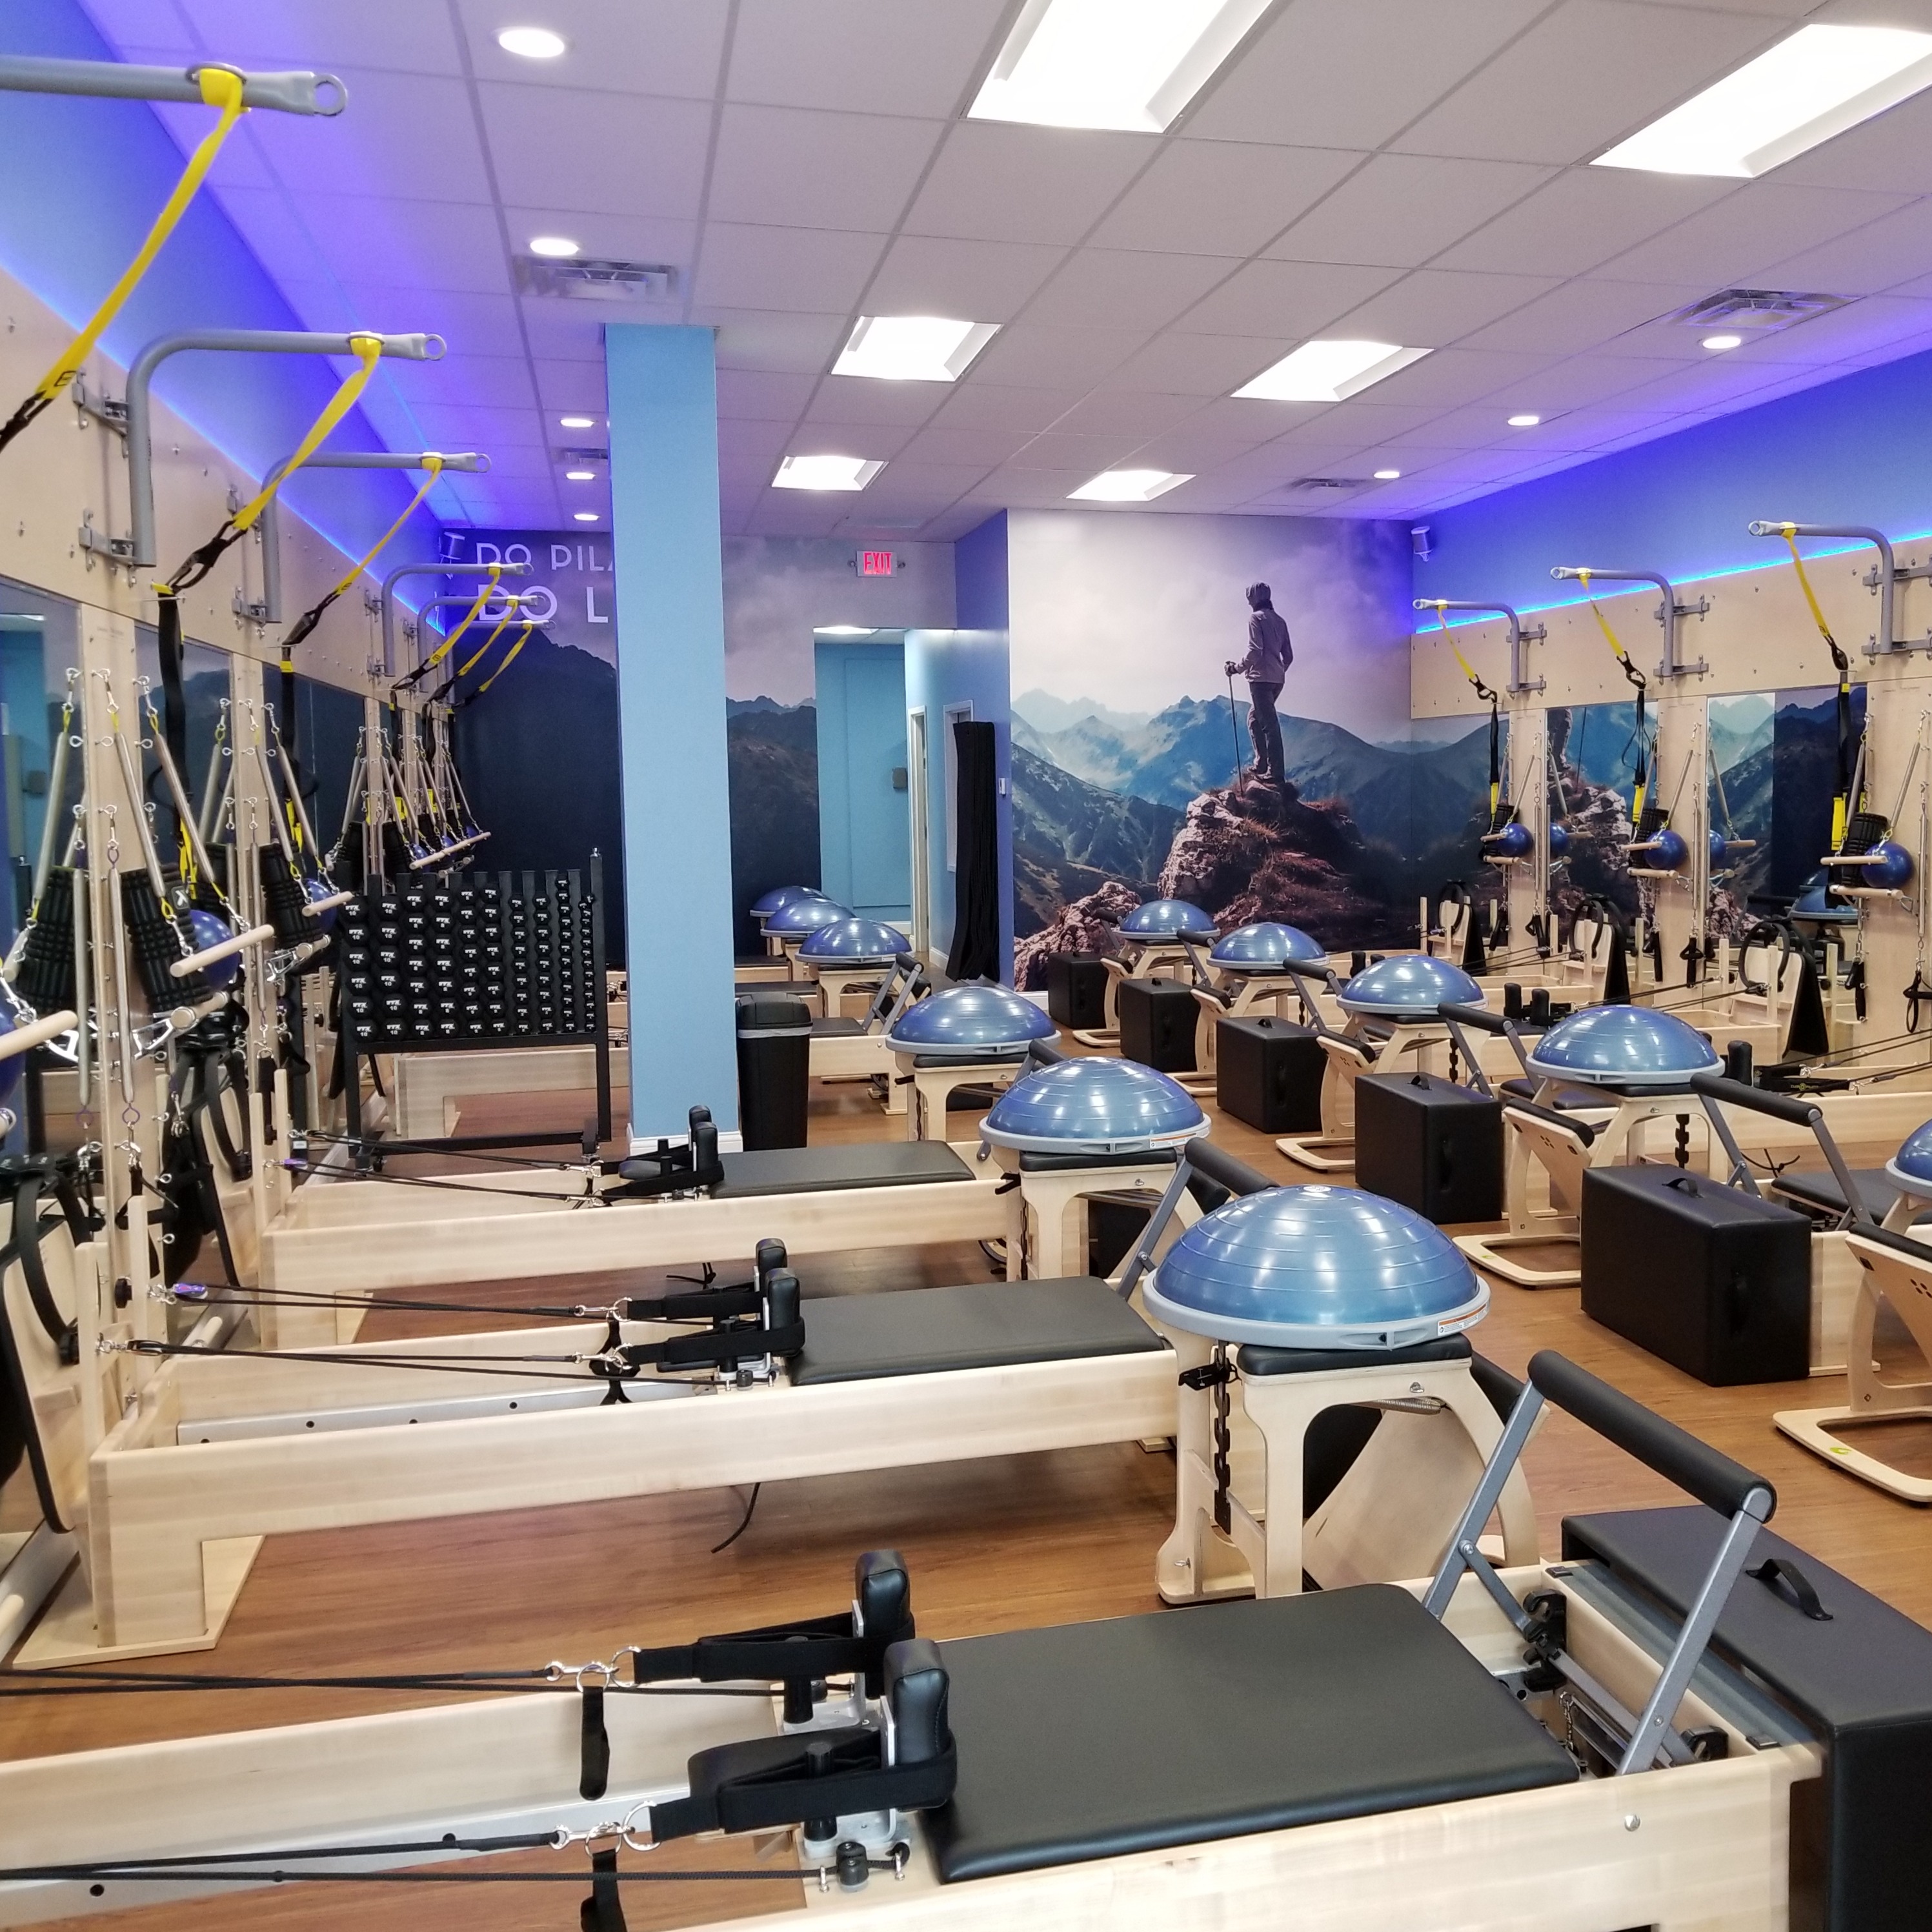 Holiday Party at Club Pilates, 15735 E Broadway Ave, Ste 3C2